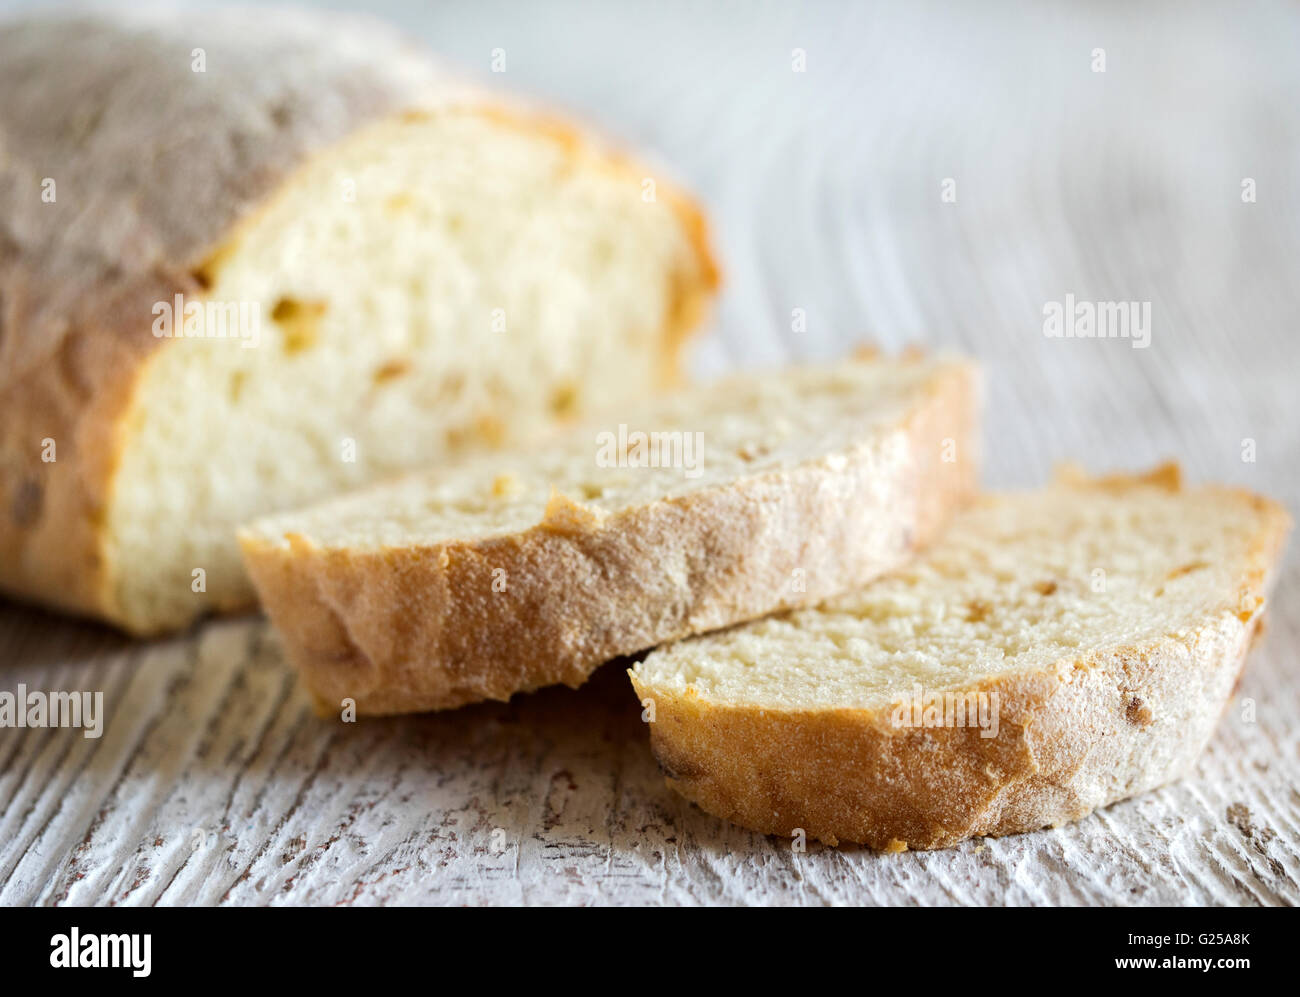 Loaf of wholemeal bread and slices of bread Stock Photo